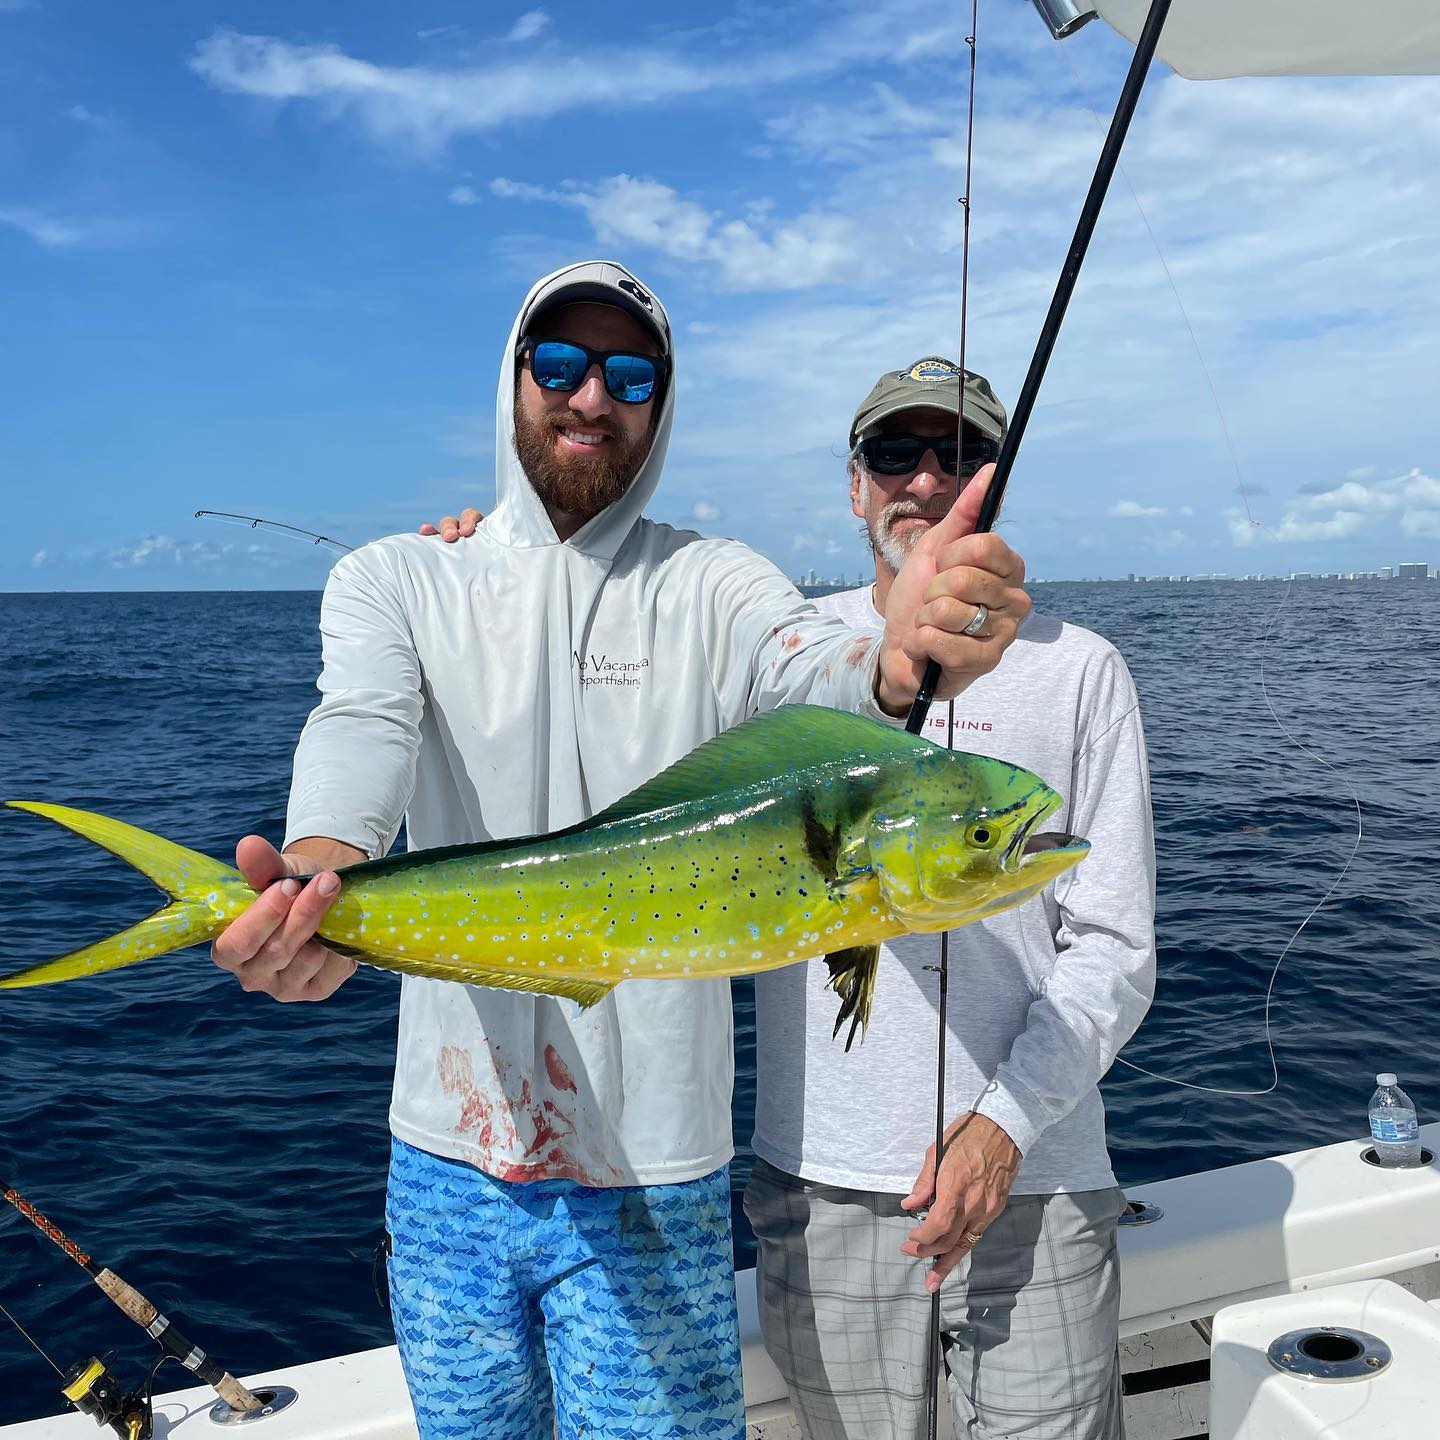 Fun Father’s Day trip with my paps, THE BEST DAD I EVER HAD. My dad crushed the mahis on 10lb spin and had a blast. Our buddy Steve Waters came along too and documented the experience and even caught a couple dolphinfish. #GOHARDFISHING #miamibeach #charterfishing #bloodsplatteranalyst @starbrite_com @captharrysfishingsupply @hookerelectricreels